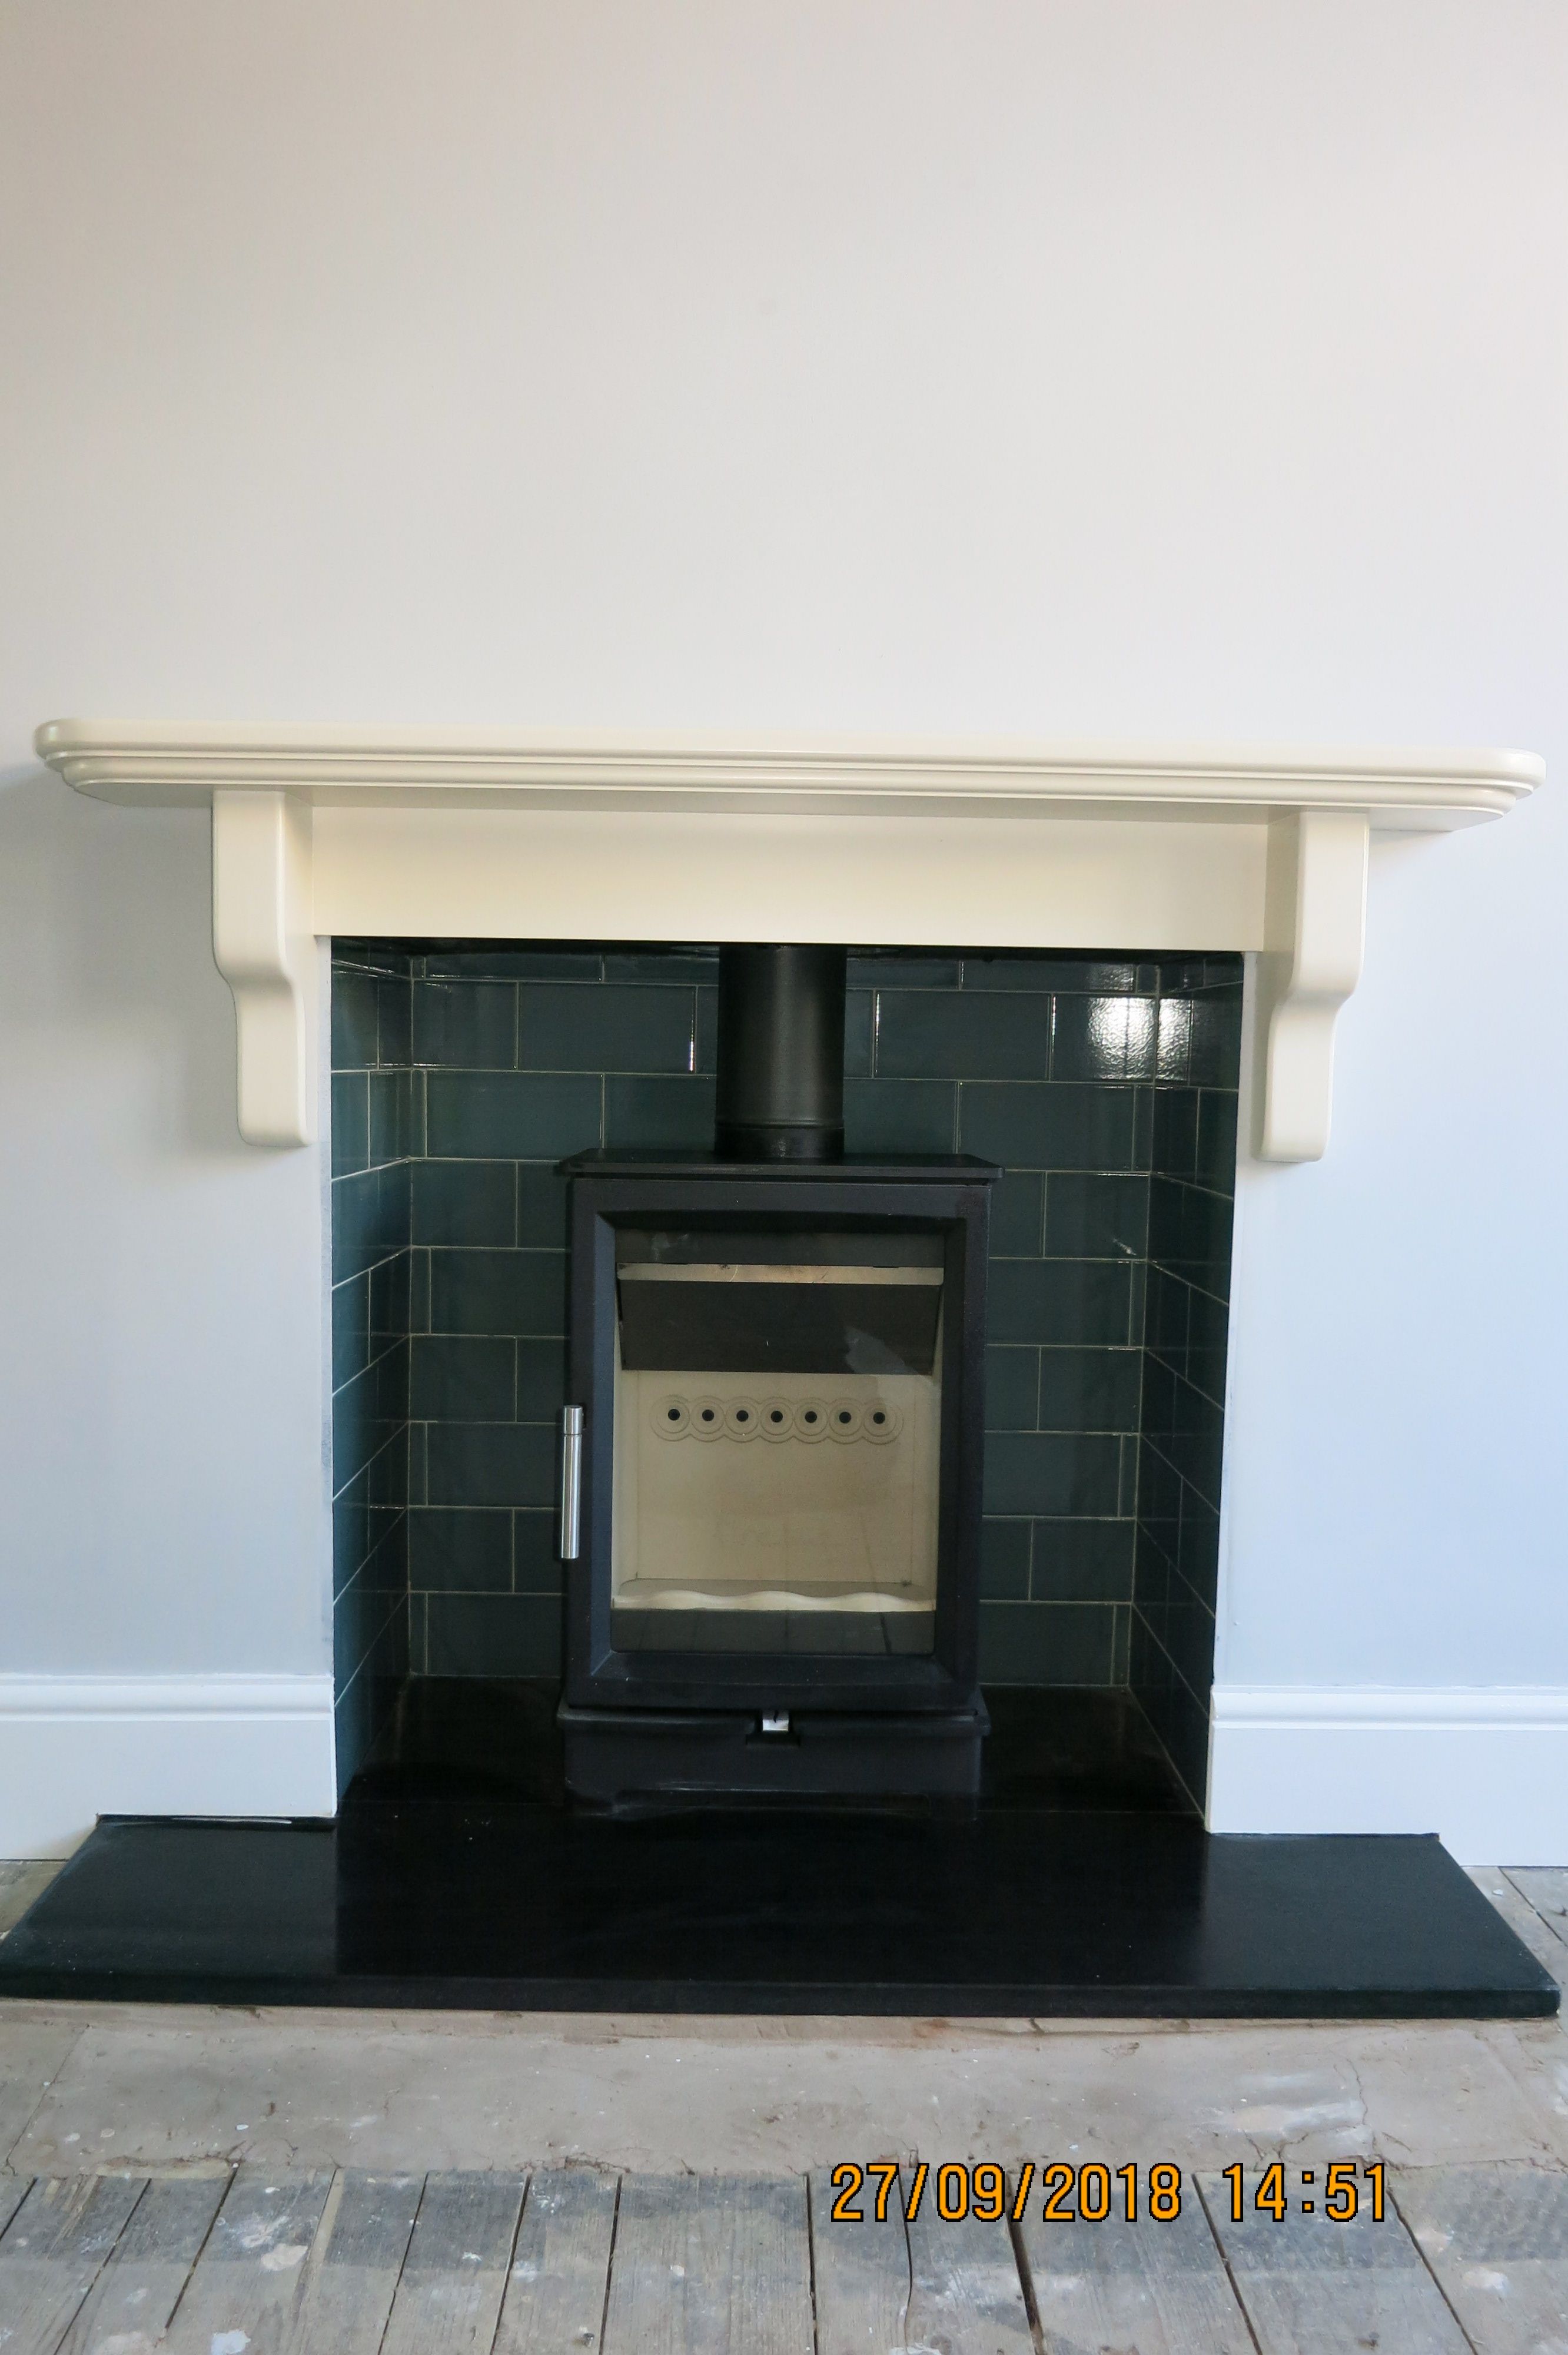 Fireplace and Granite Unique How Nice is This A Woodtec 5kw Wood Burning Stove Green